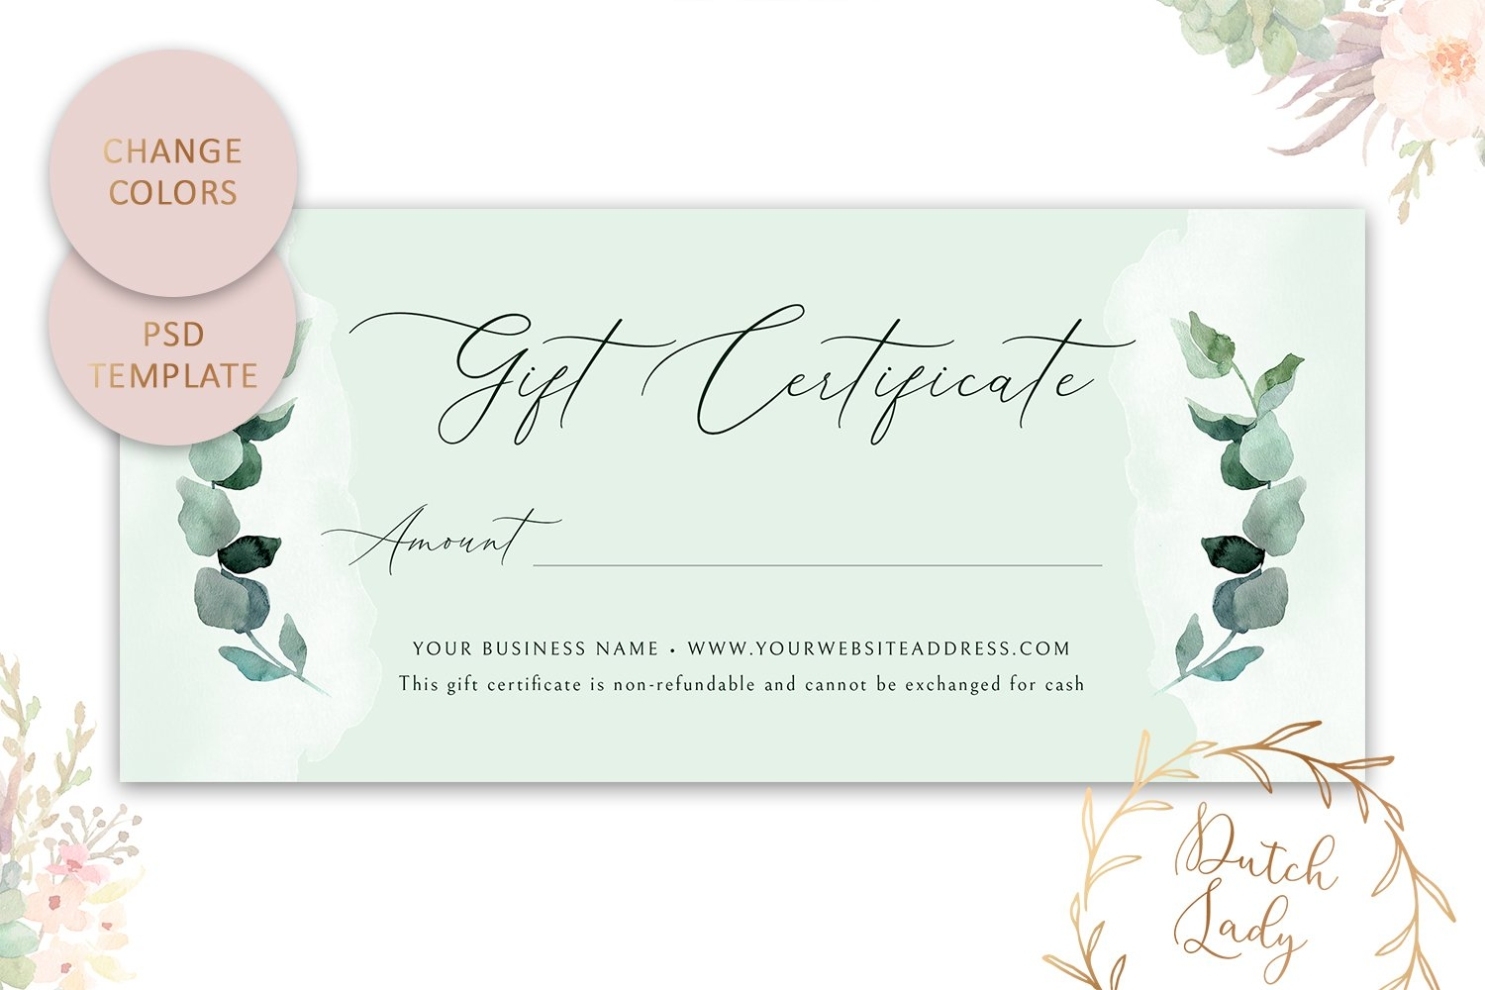 Gift Certificate Card Template – Single Sided #2 (787721) | Card And Invites | Design Bundles Inside Donation Card Template Free